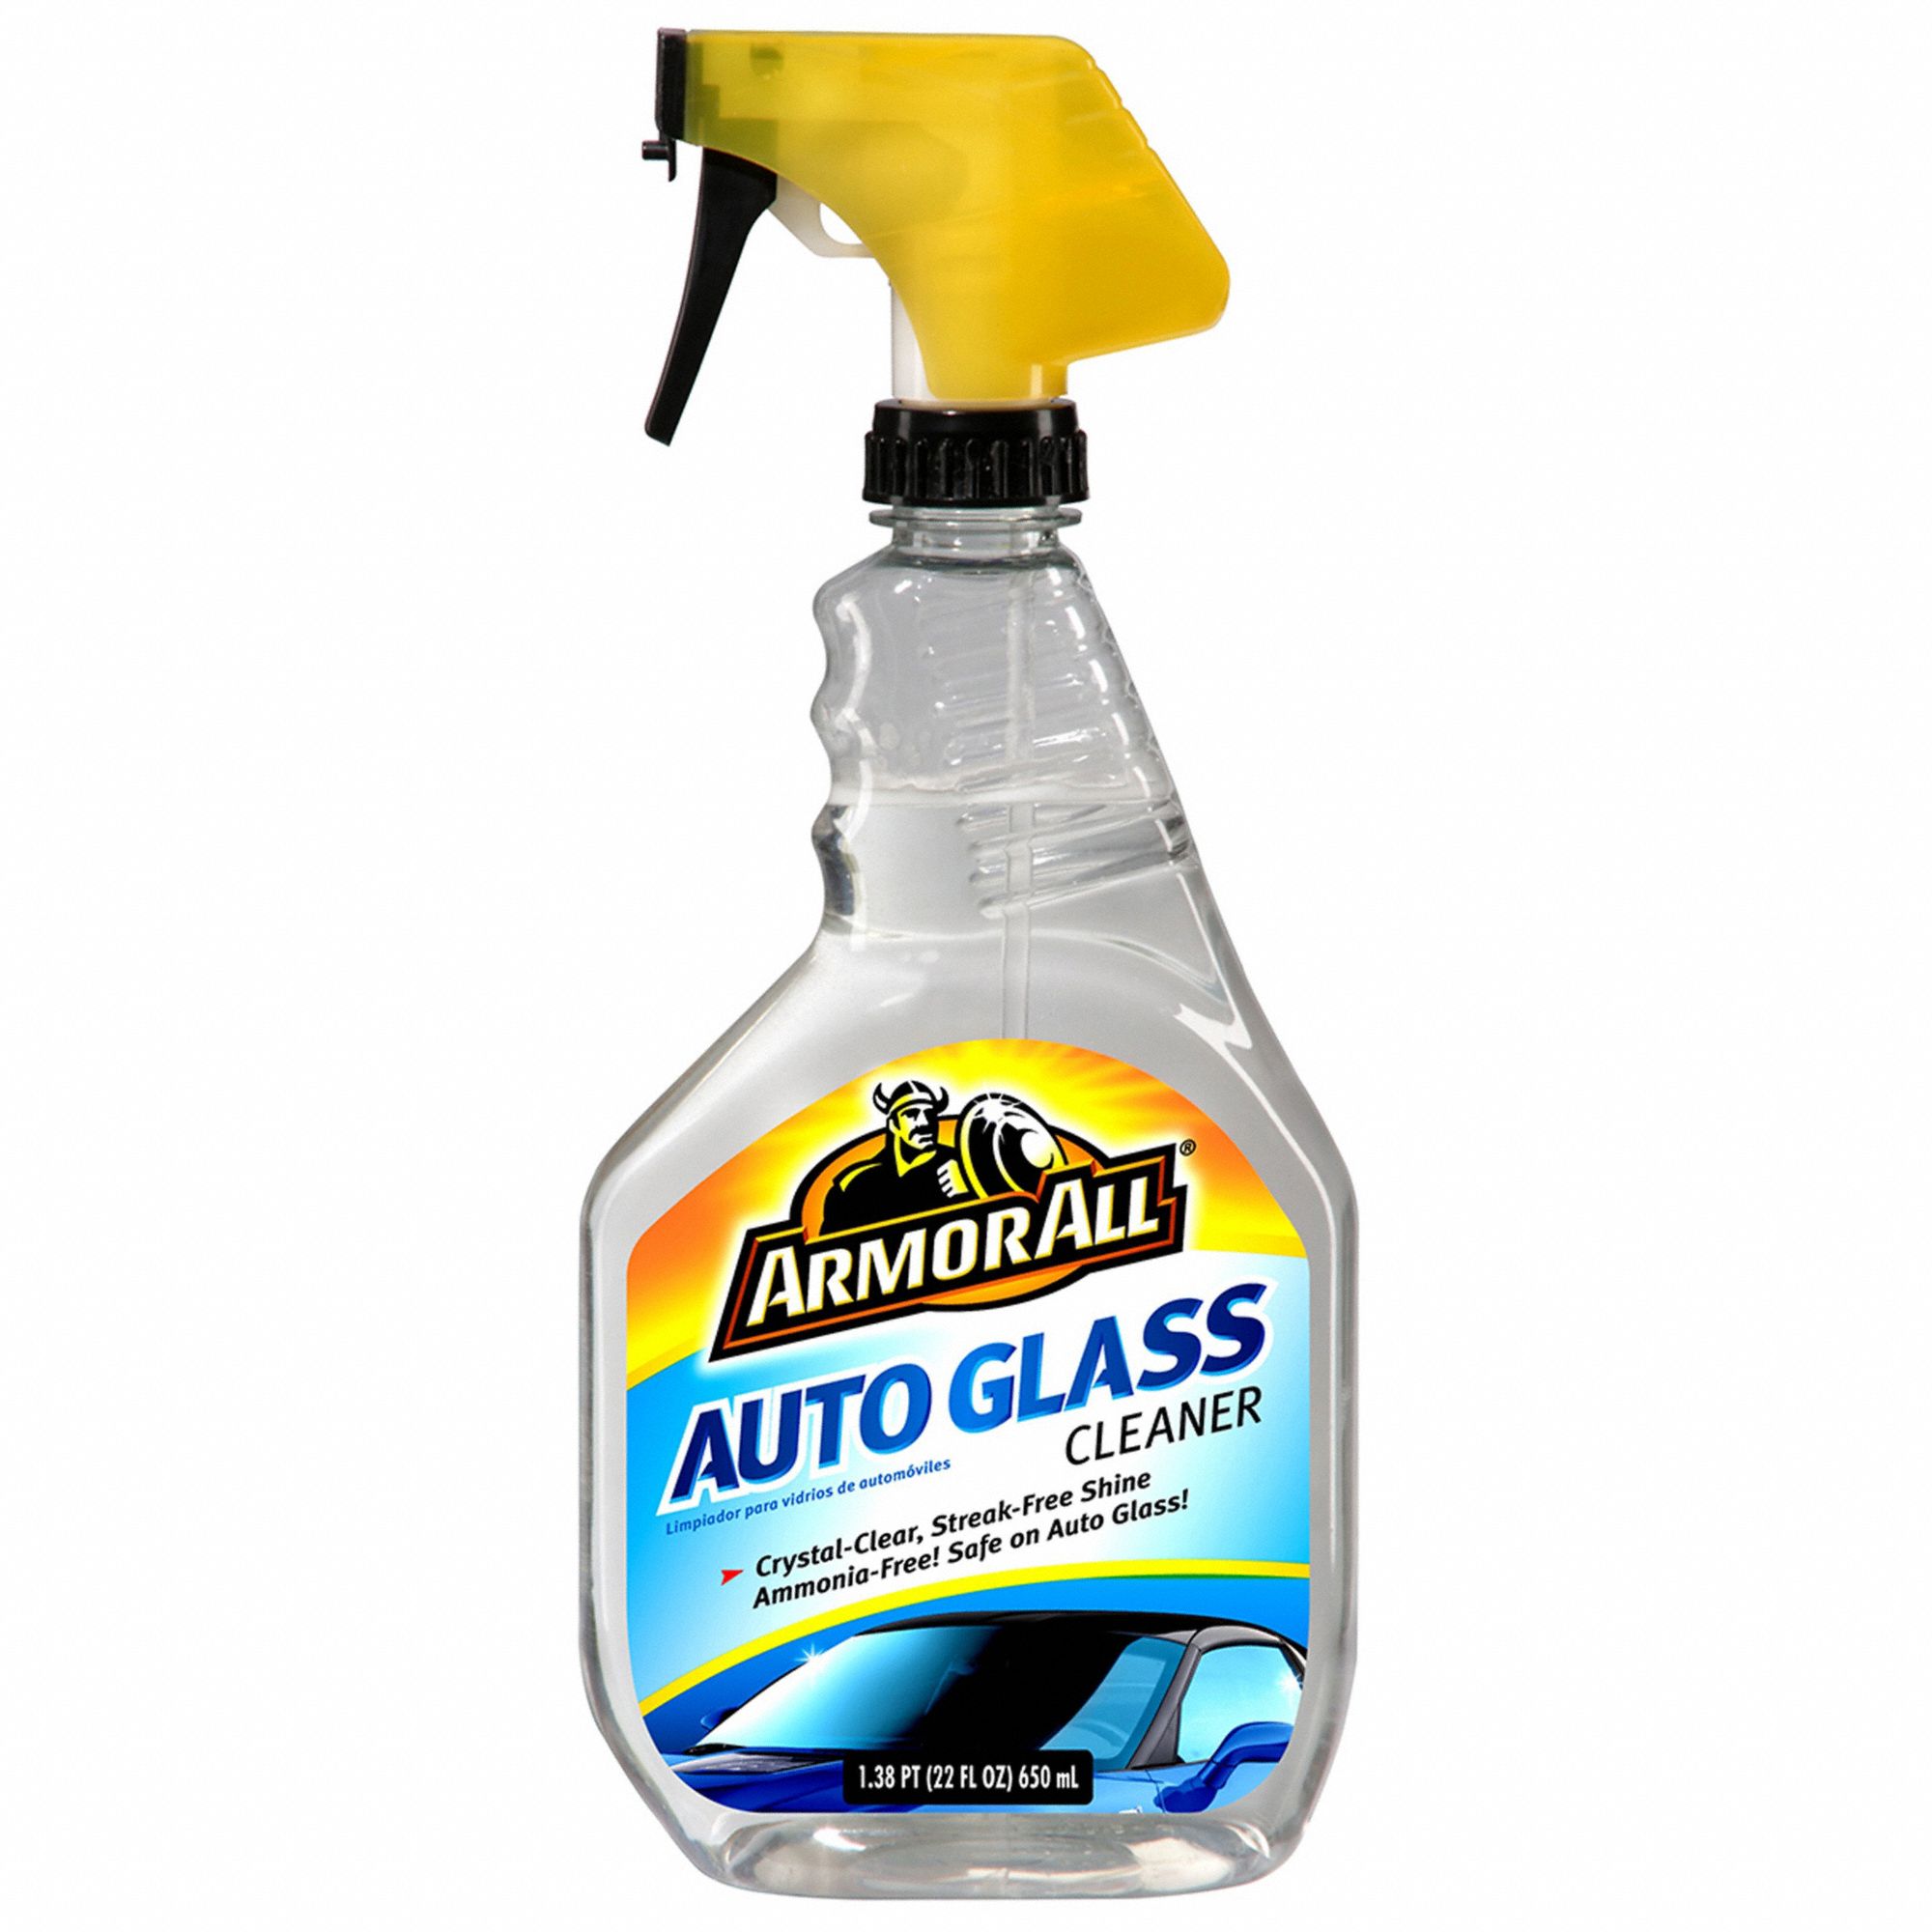 SET OF 2 Armor All Glass Cleaner Auto Cleaner 4 oz Bottle